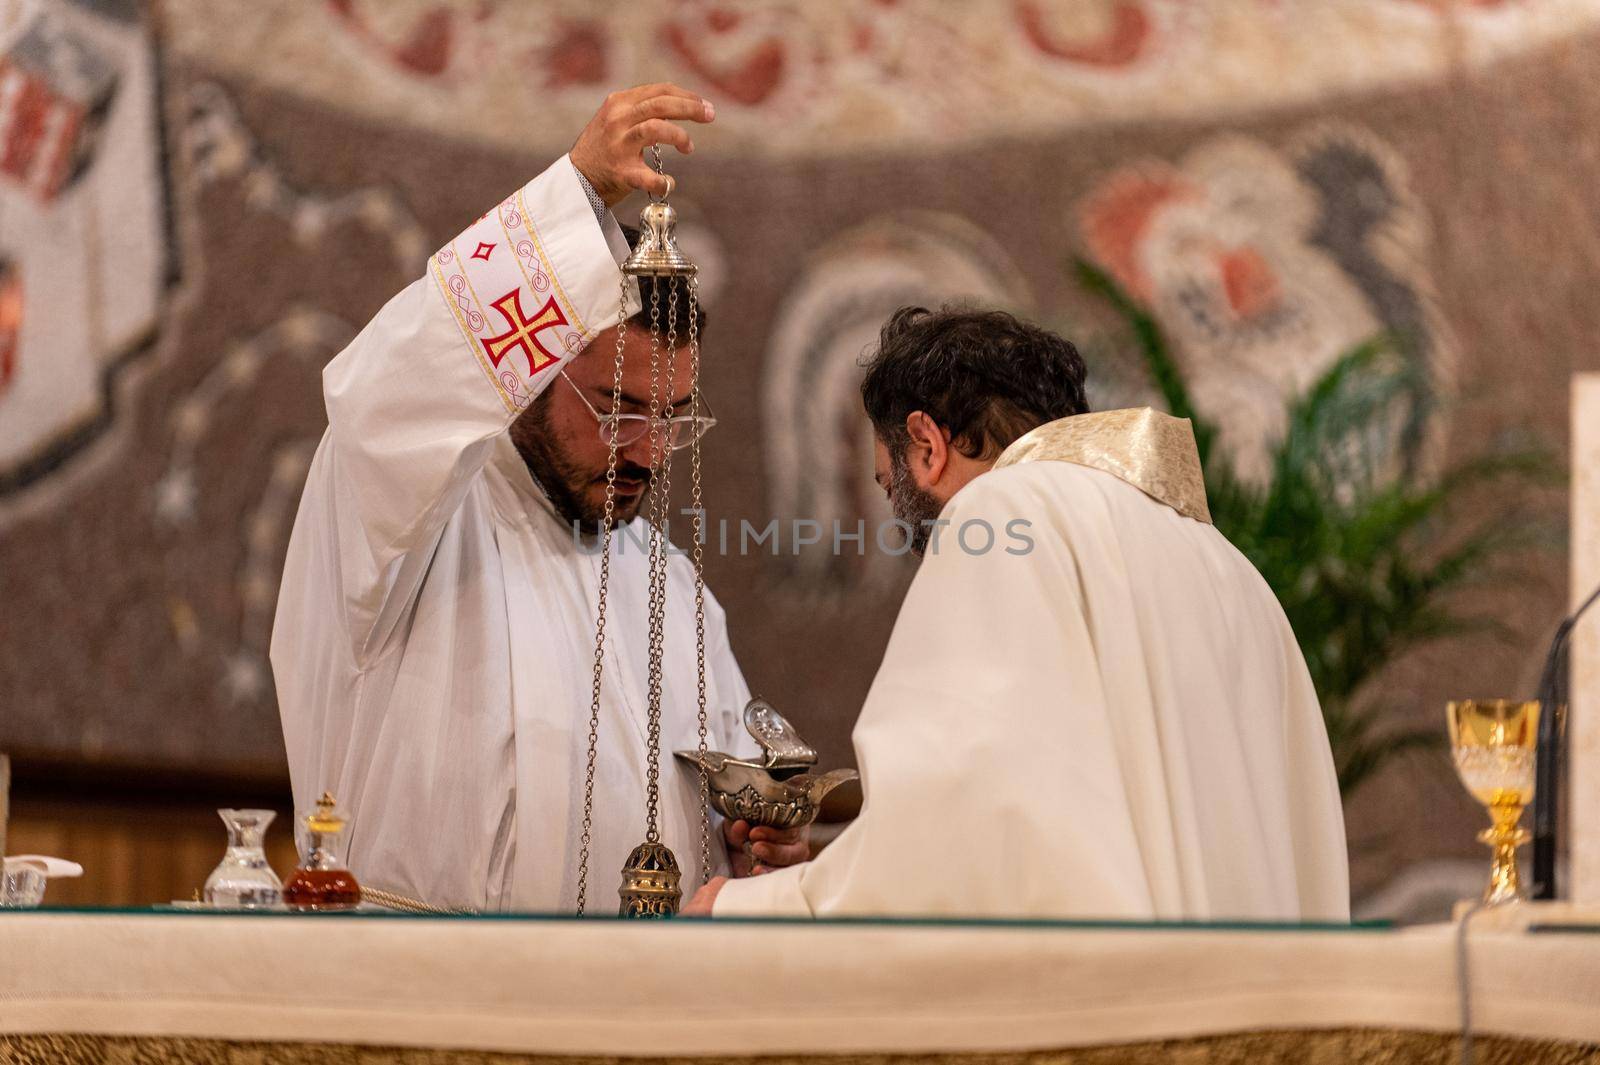 priests during the holy mass in the church of sacro cuore terni by carfedeph